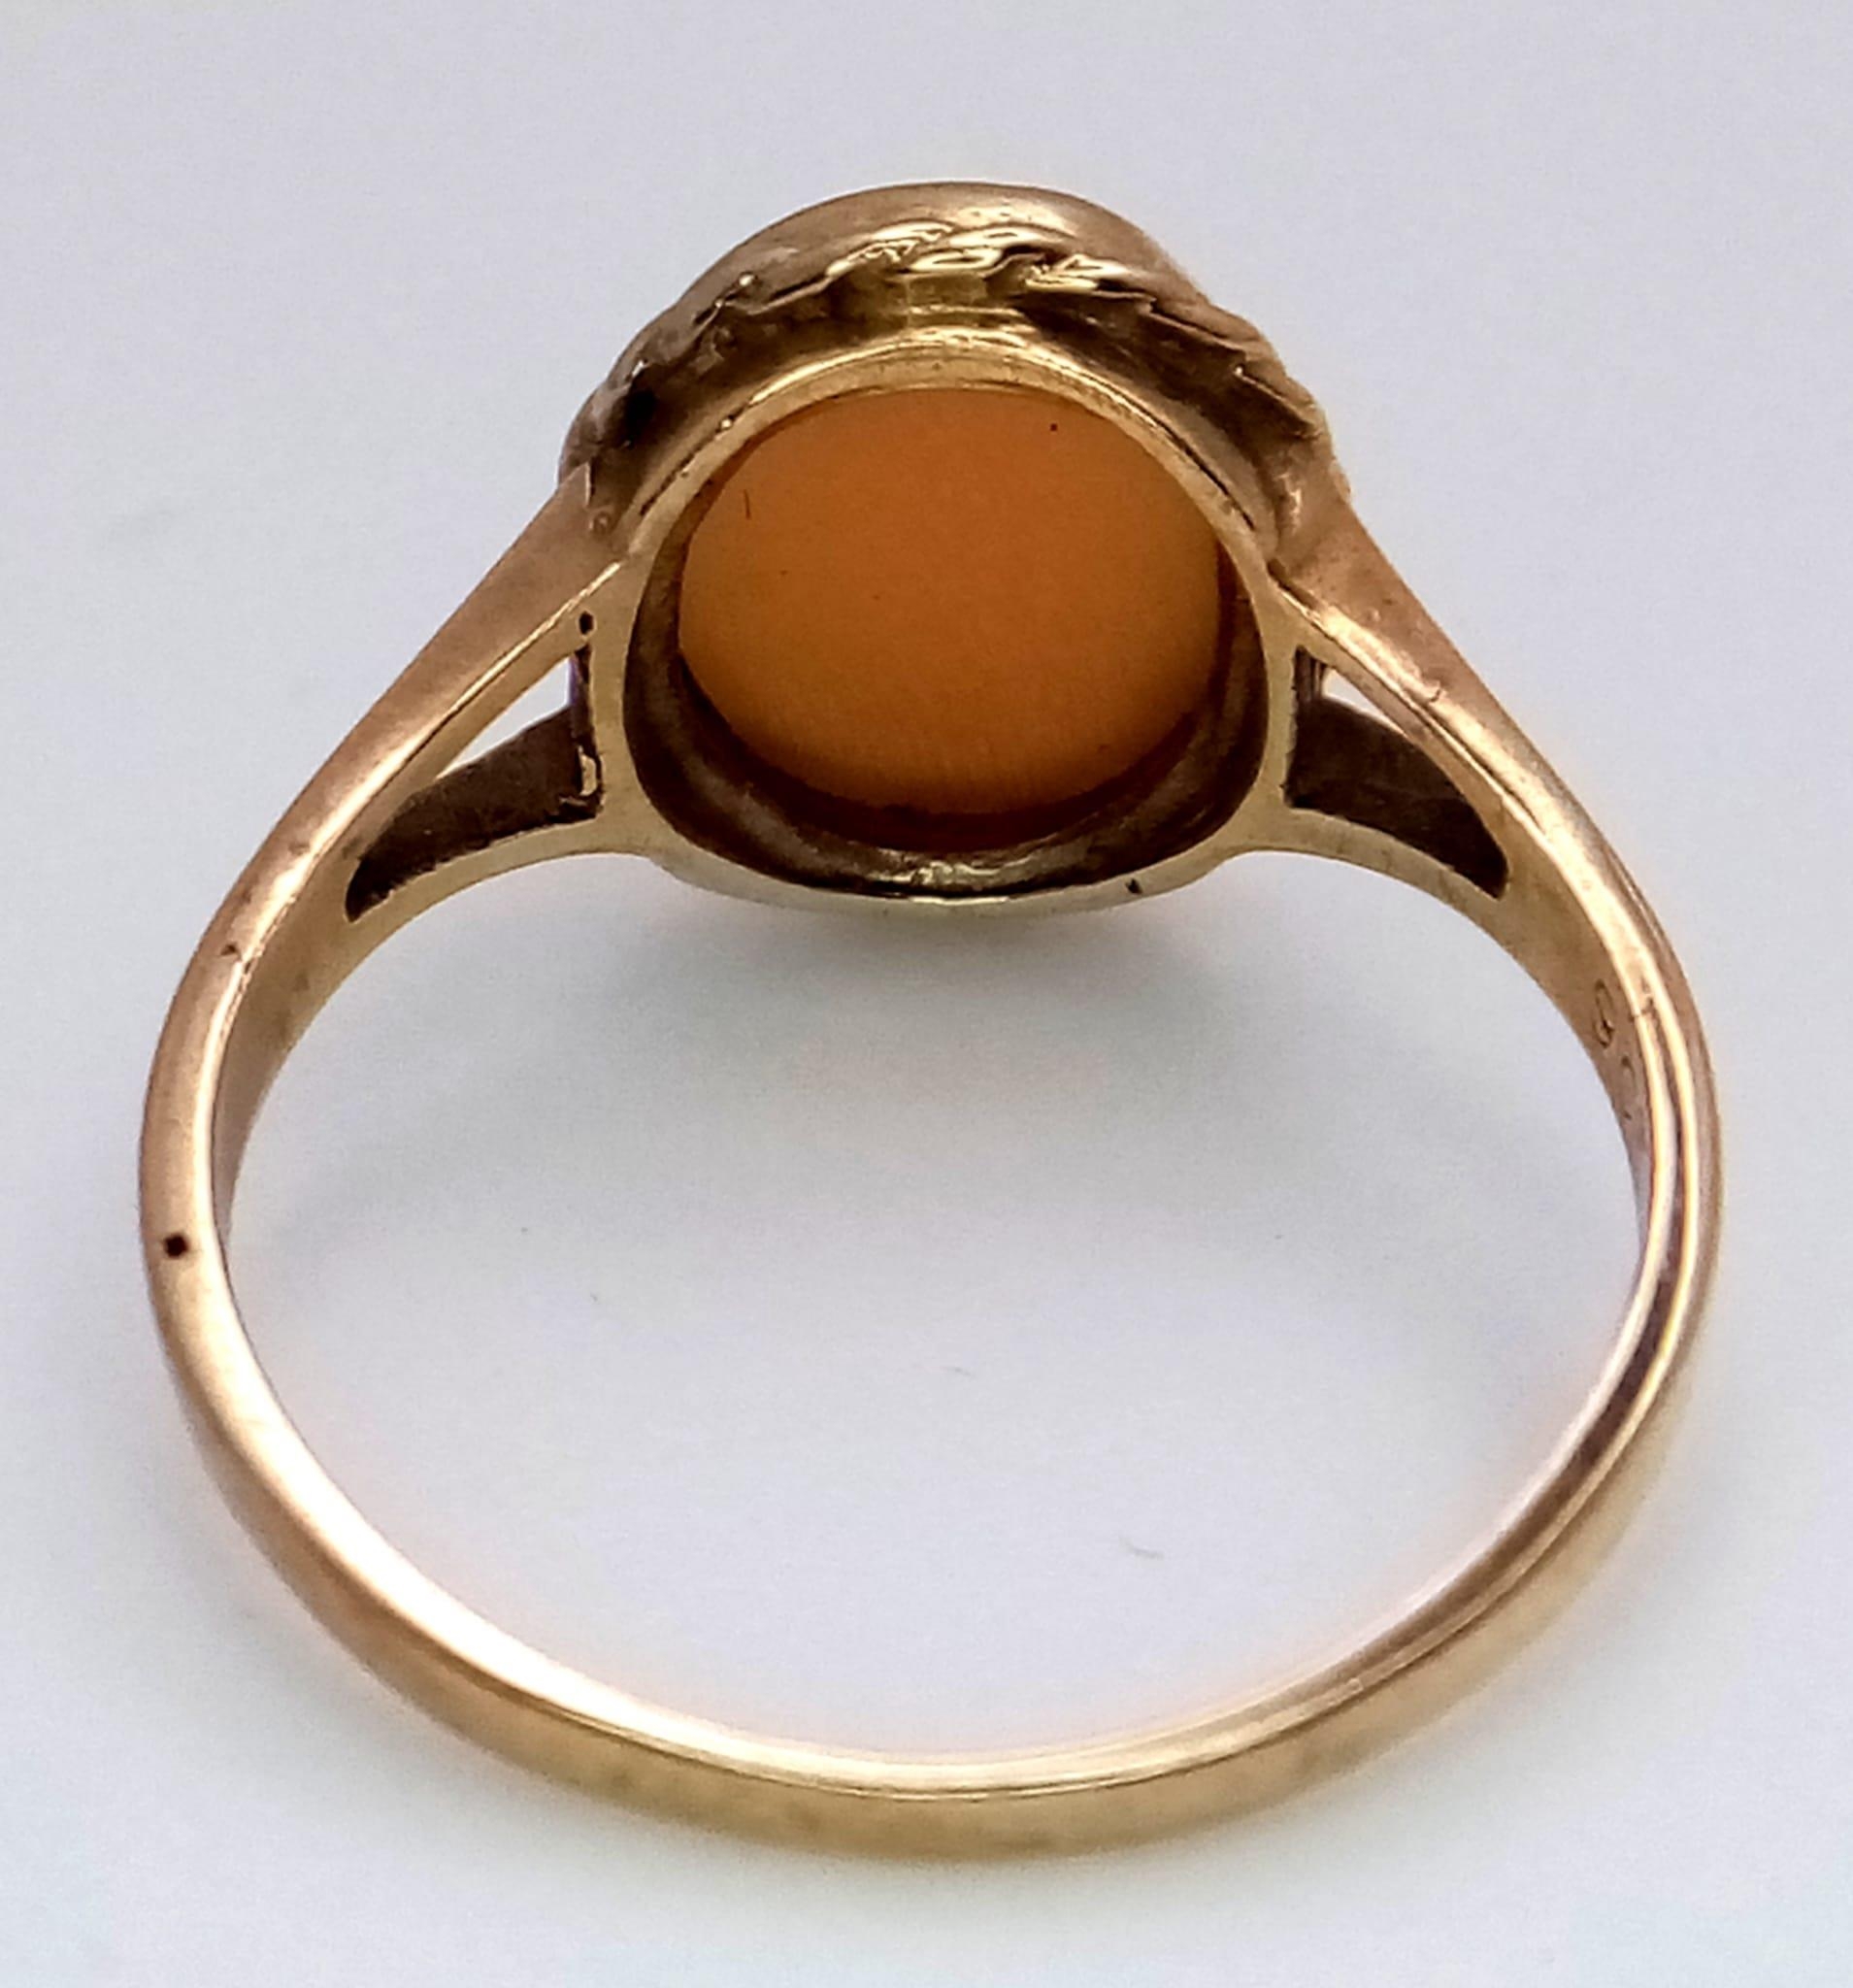 A Vintage 9K Yellow Gold Cameo Ring. Size M. 2g total weight. - Image 4 of 5